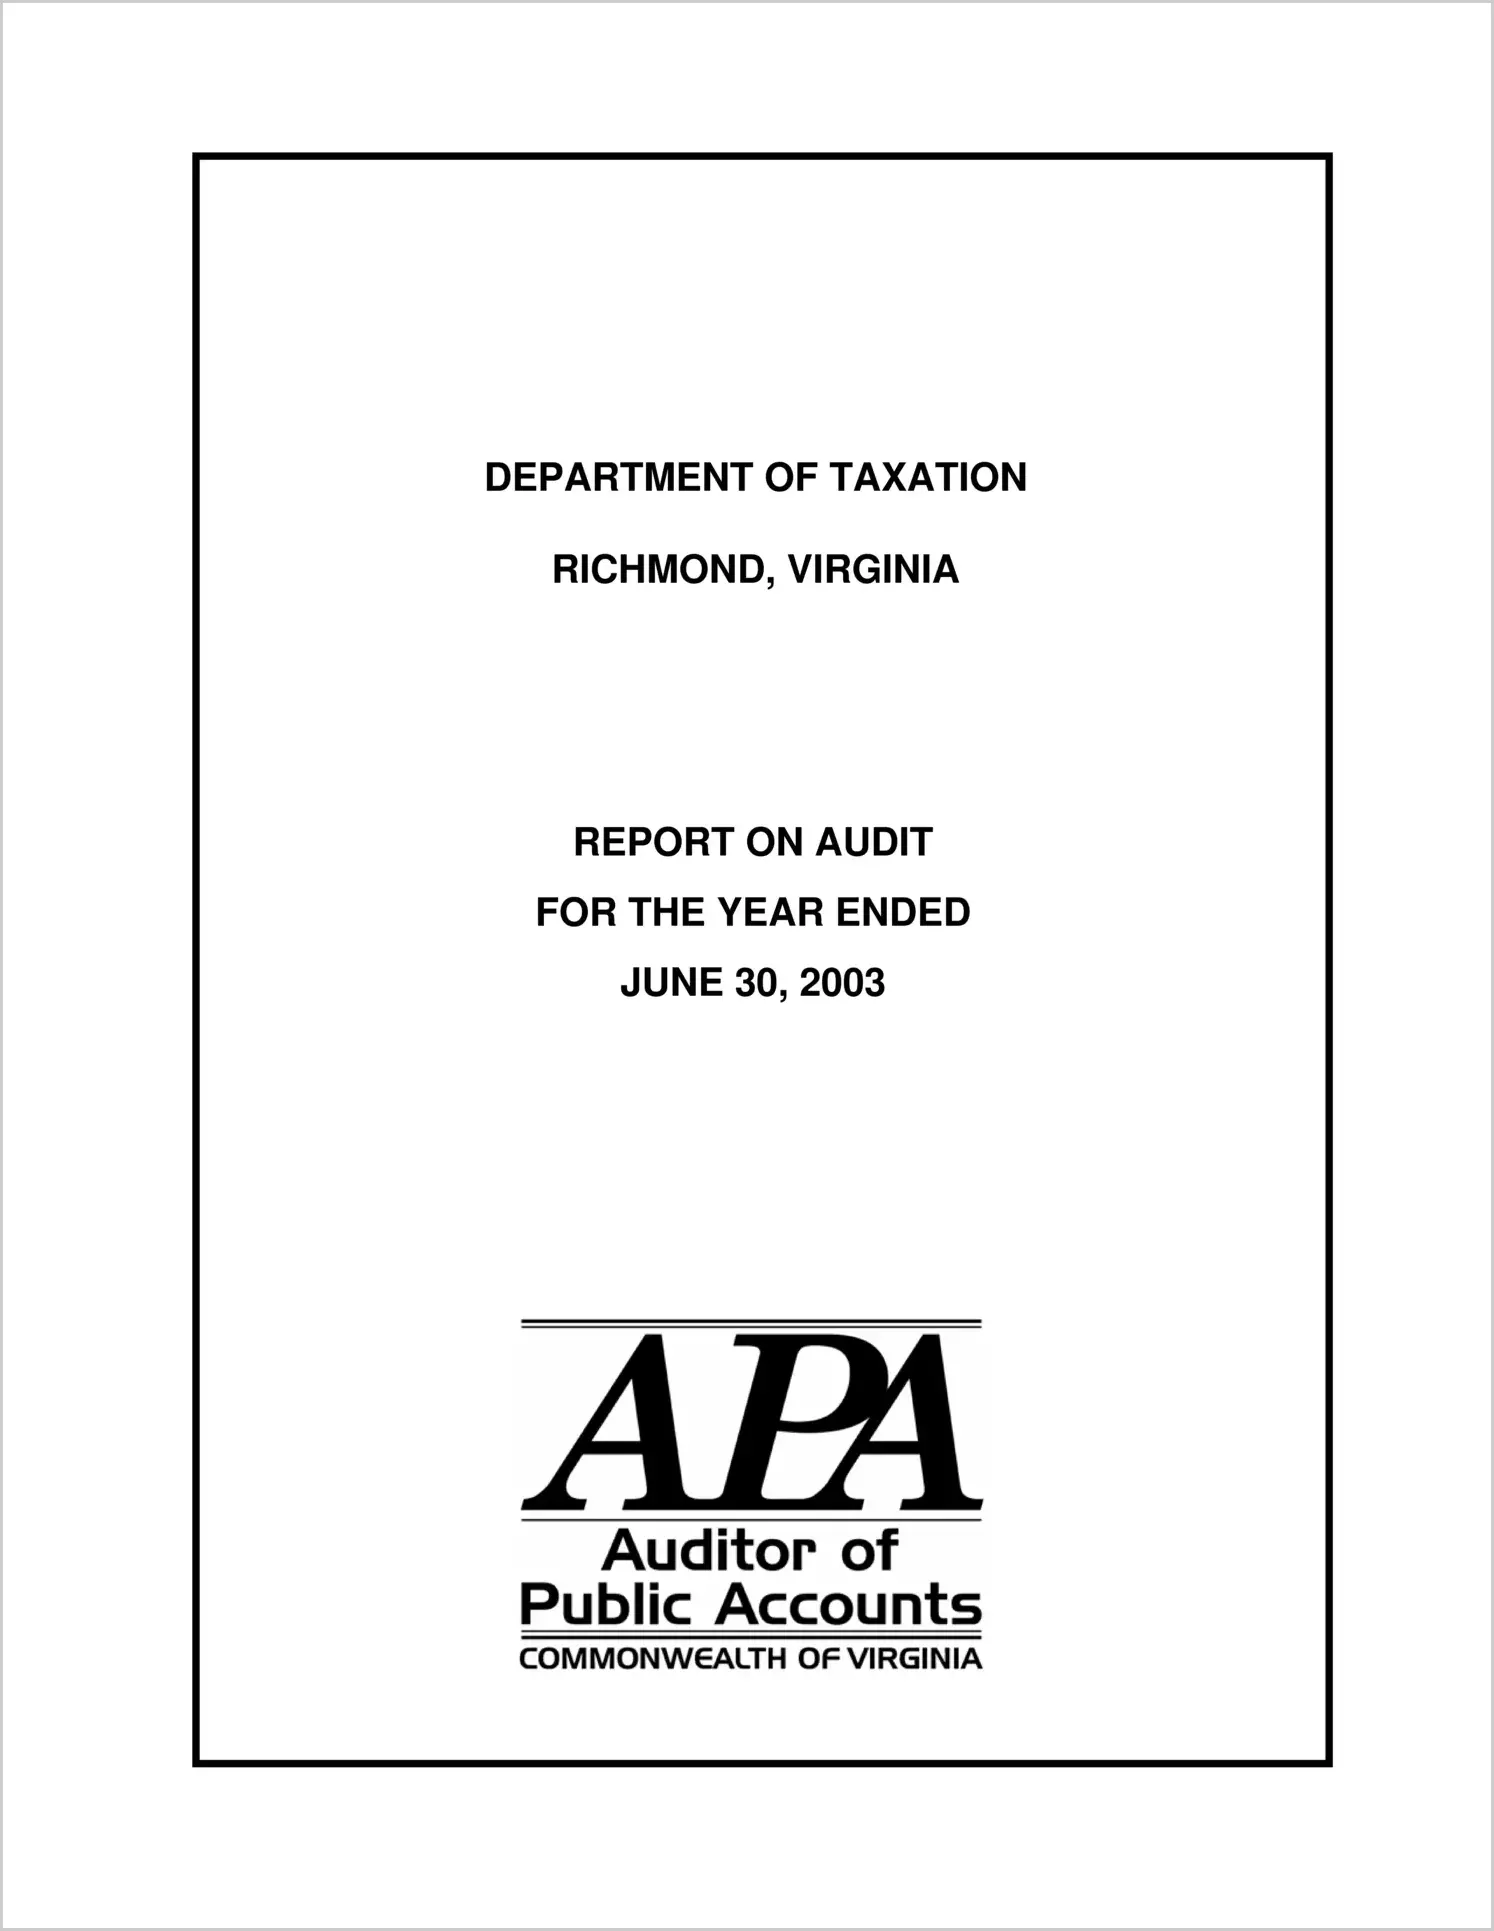 Department of Taxation for the year ended June 30, 2003